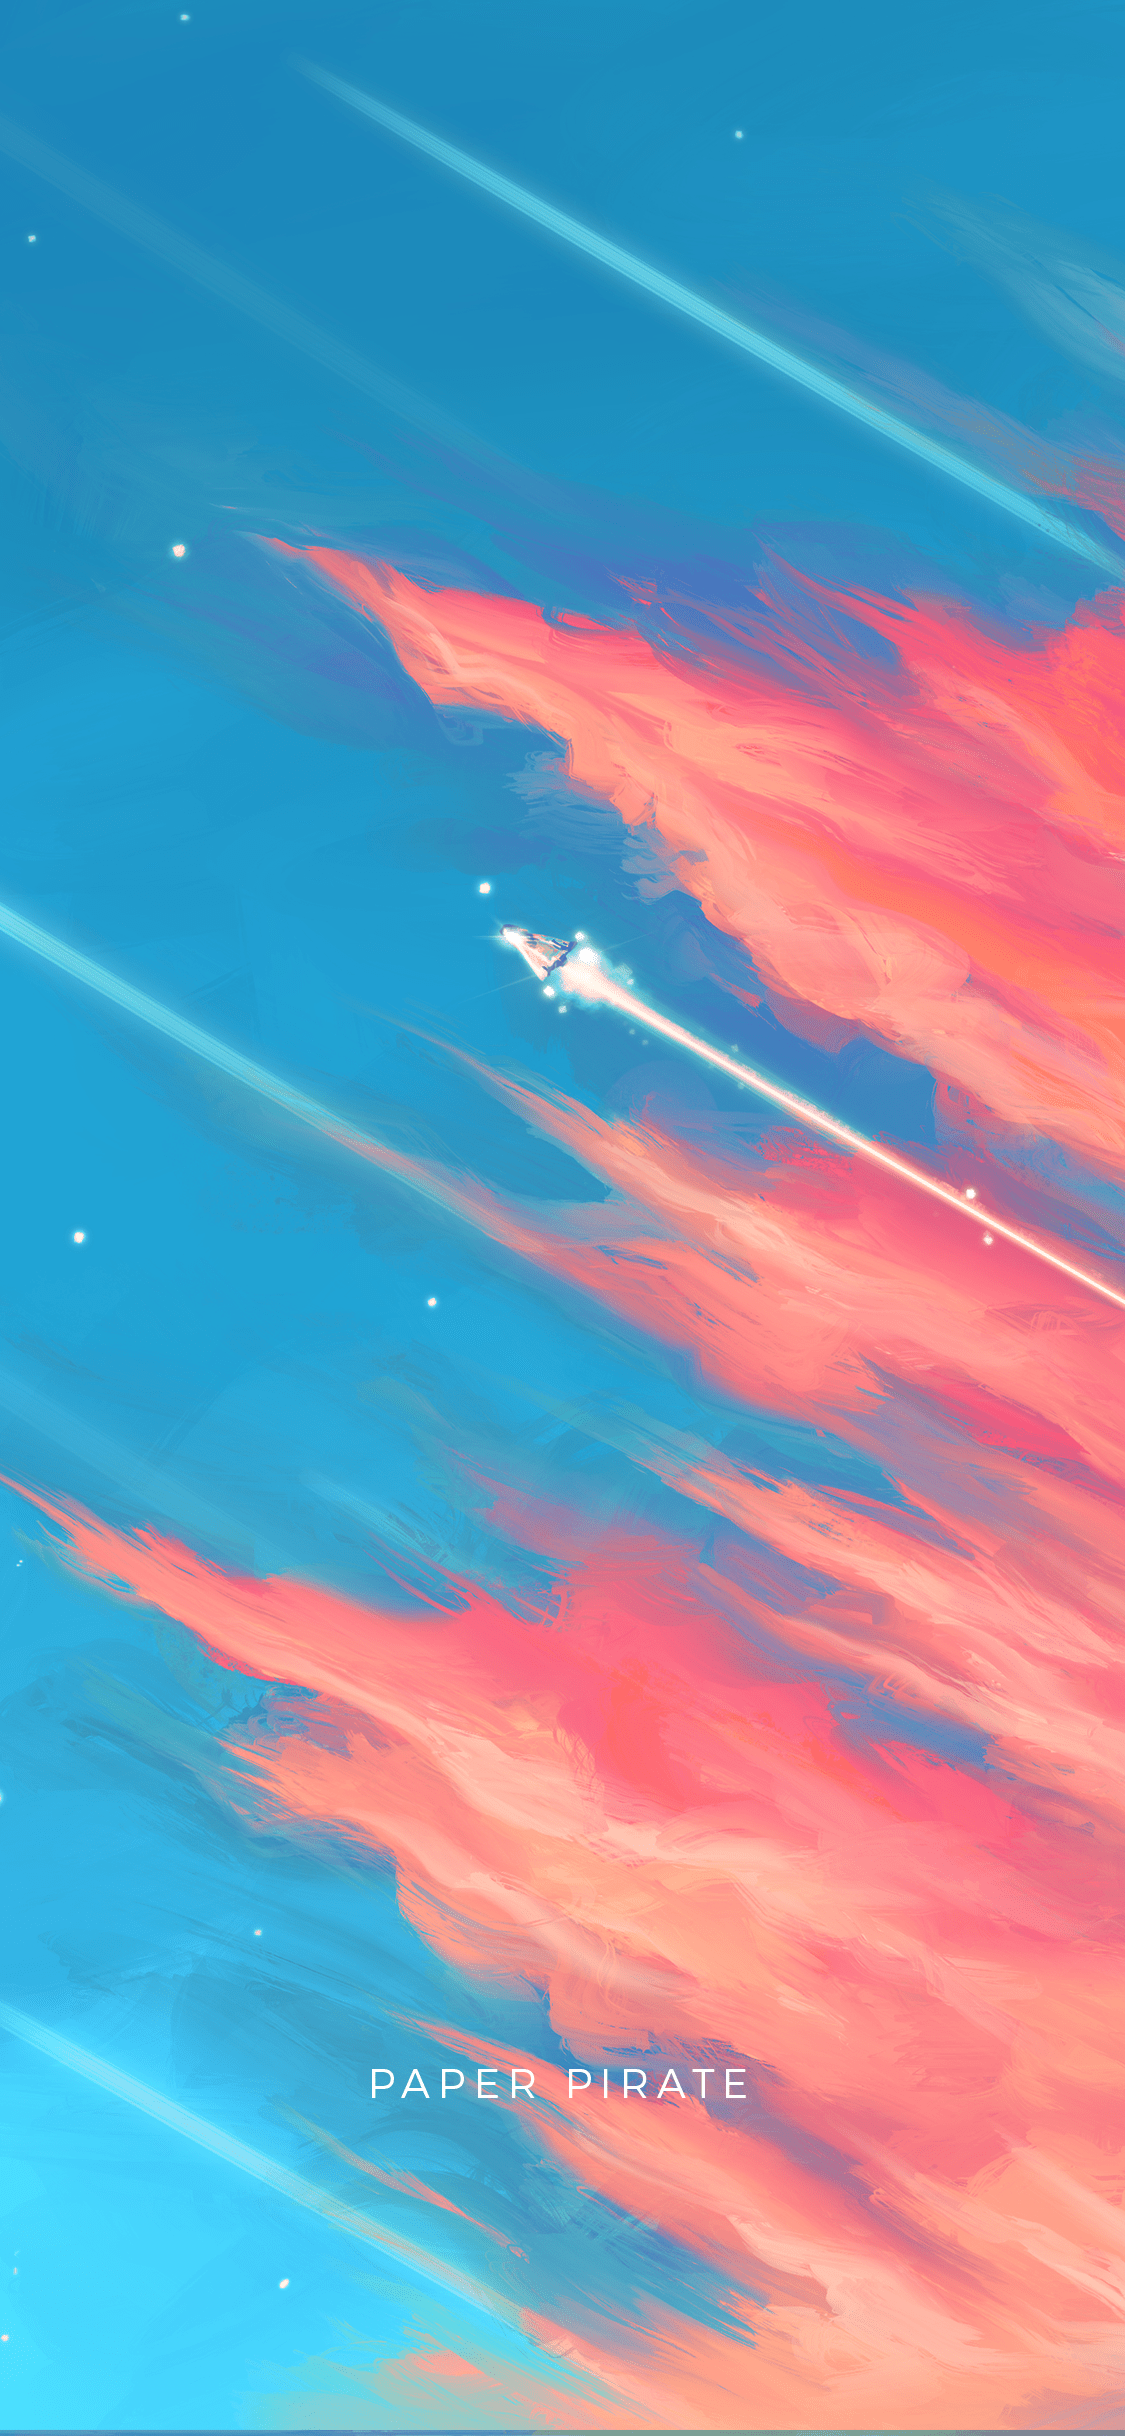 A painting of the sky with stars and planes - Pirate